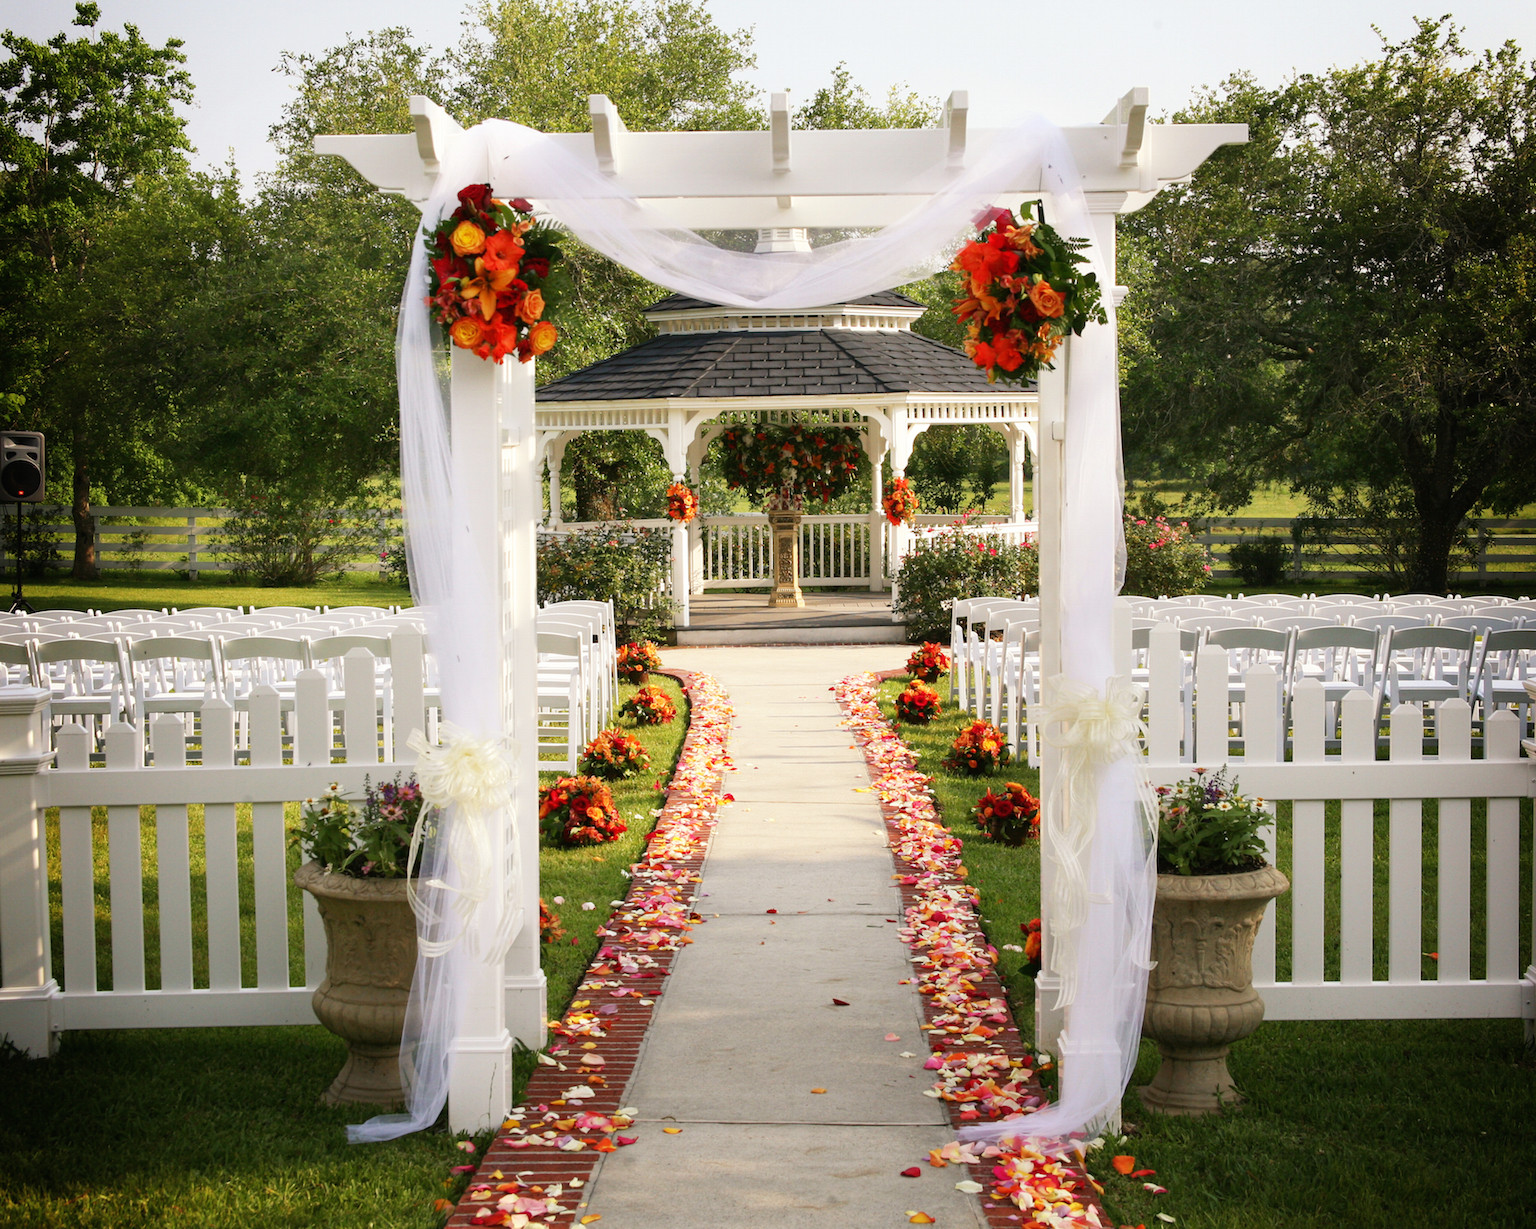 How To Decorate A Gazebo For A Wedding
 35 Outdoor Wedding Decoration Ideas